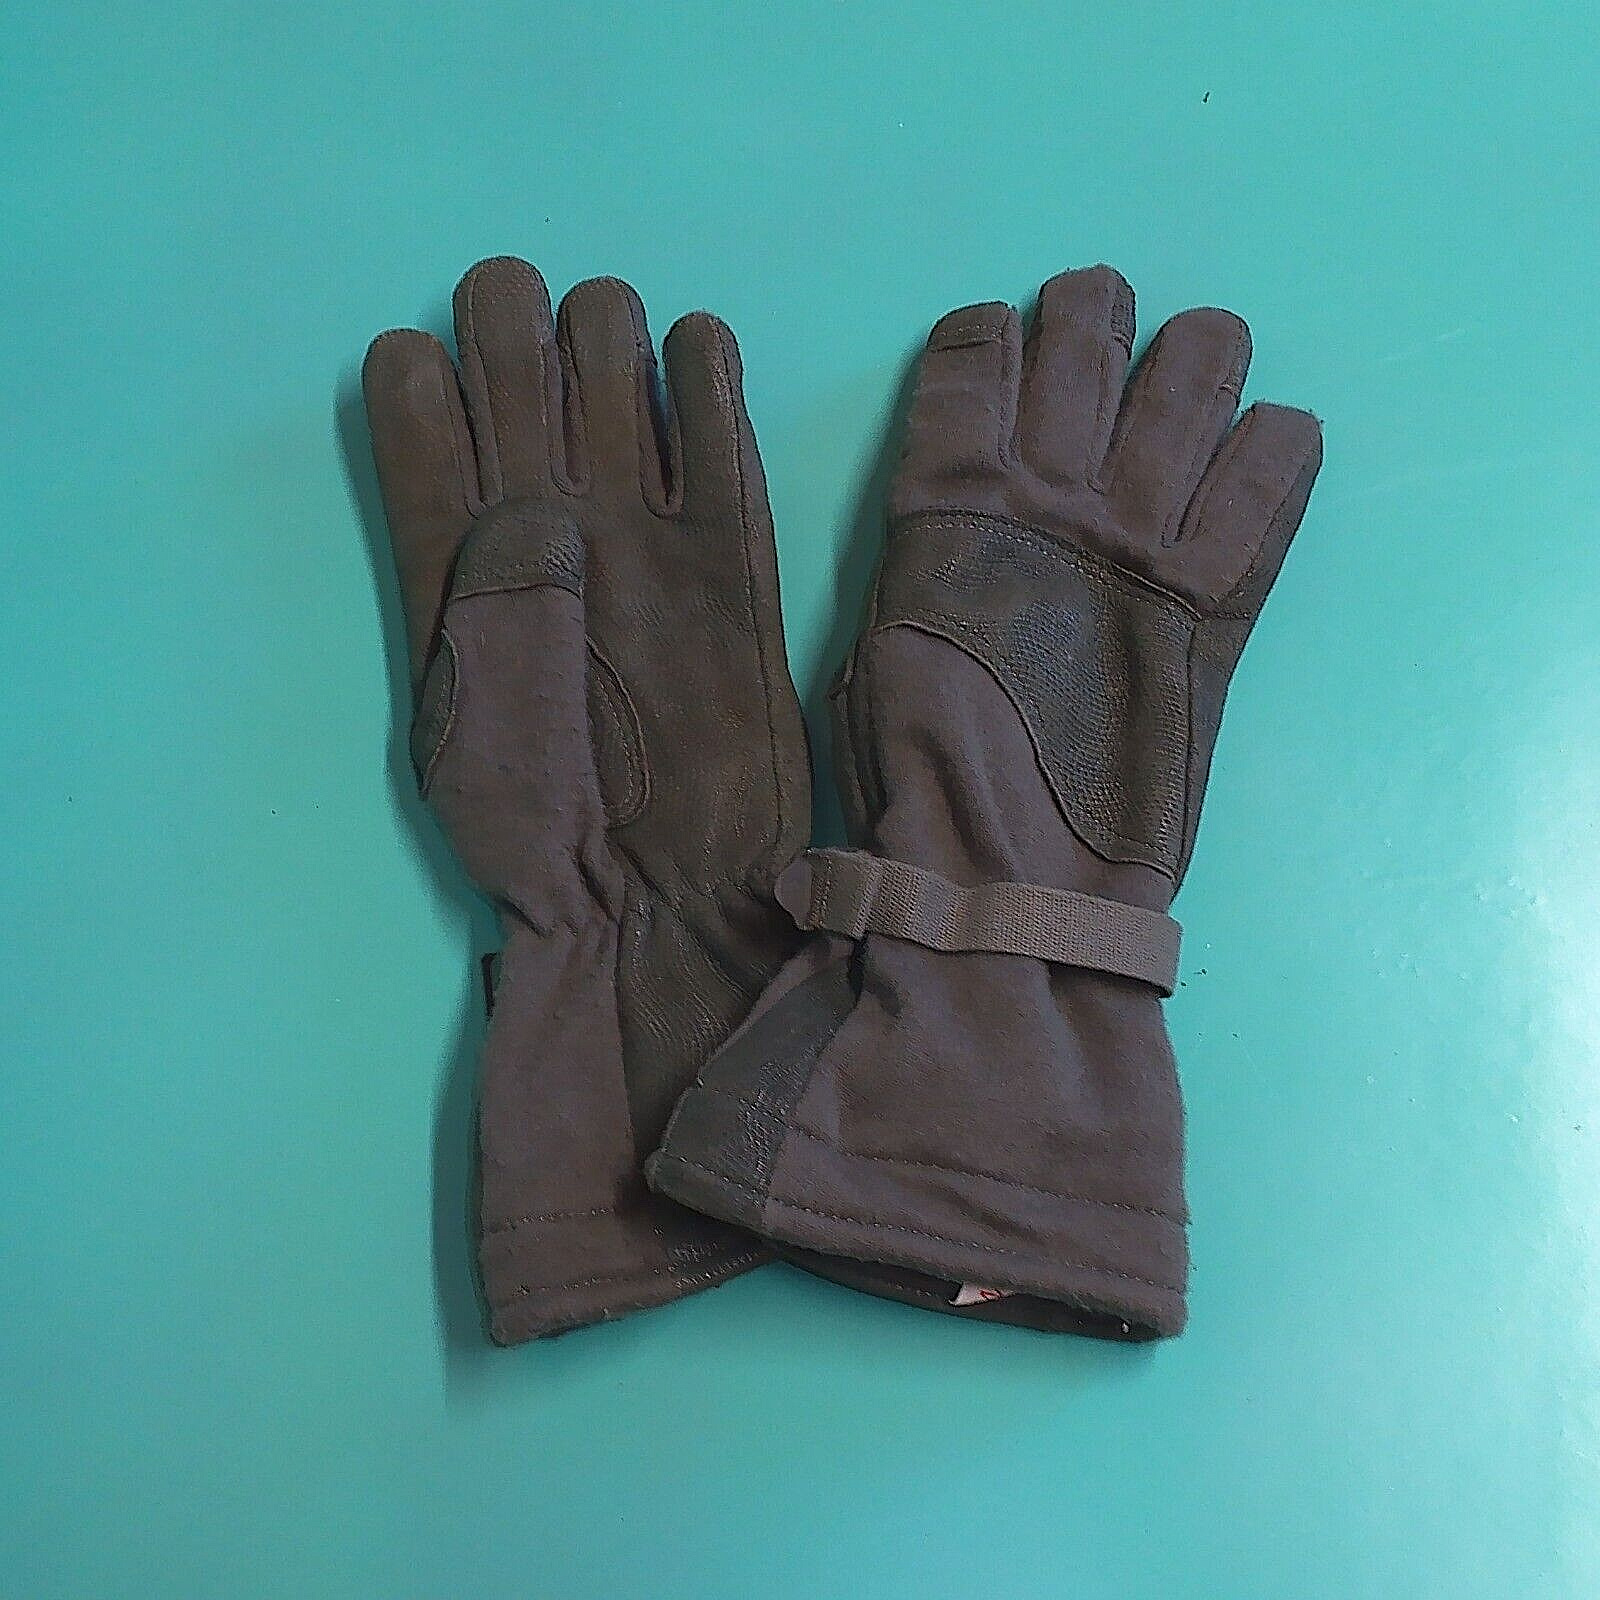 USGI Masley Foliage GORE-TEX Cold Weather Flyers Gloves CWF-FG-70N-S Size Small